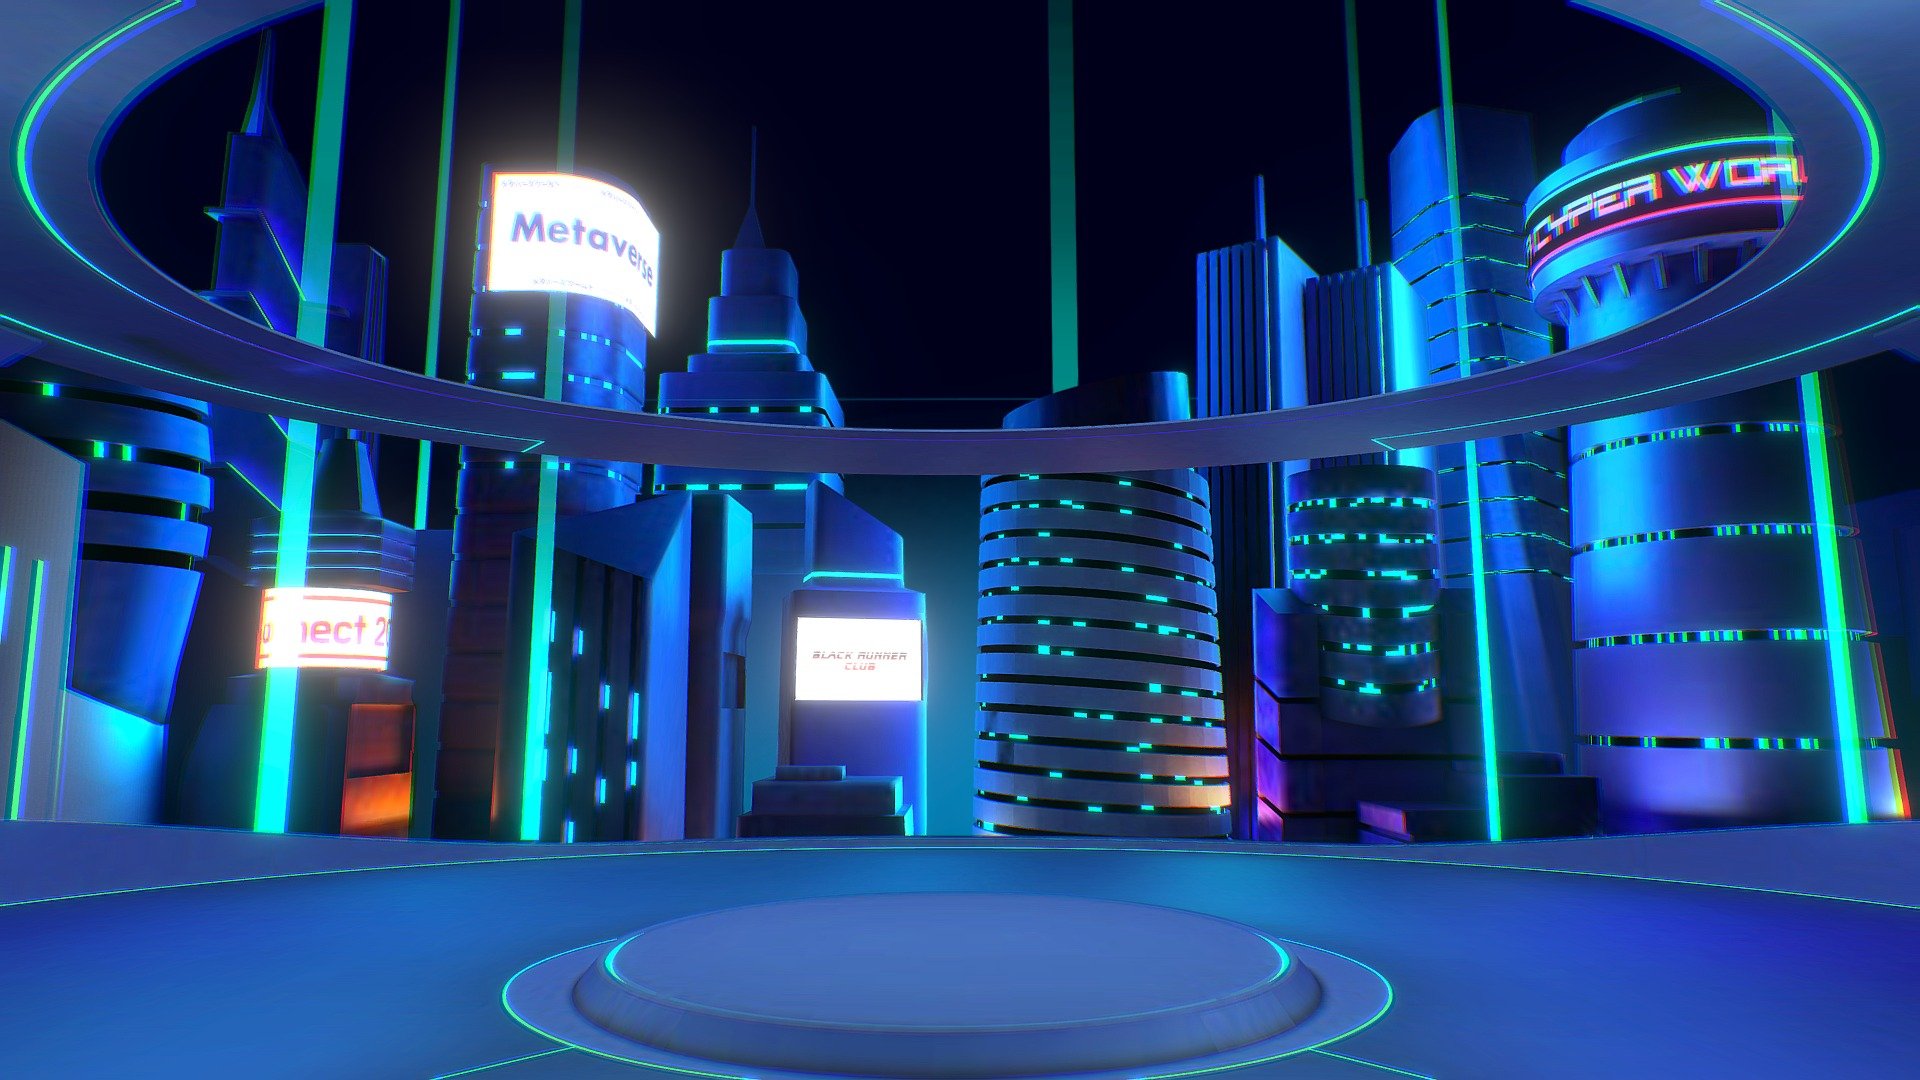 Stage platform in a scifi &amp; cyberpunk style plaza. Lights and some of the billboards are animating, giving the scene more metaverse style looks.

The scene is suit for all kinds of virtual events or online gatherings. 

⚡️ Albedo textures baked, no lighting needed in your engine.

📦 You could get the original Blender file from the attach file with buildings' geometries unmerged seperately. 

🌁 If you download the scene with GLTF format file, the billboards images on those buildings could be replaced directly in the gltf folder, without editing them in 3D softwares 3d model